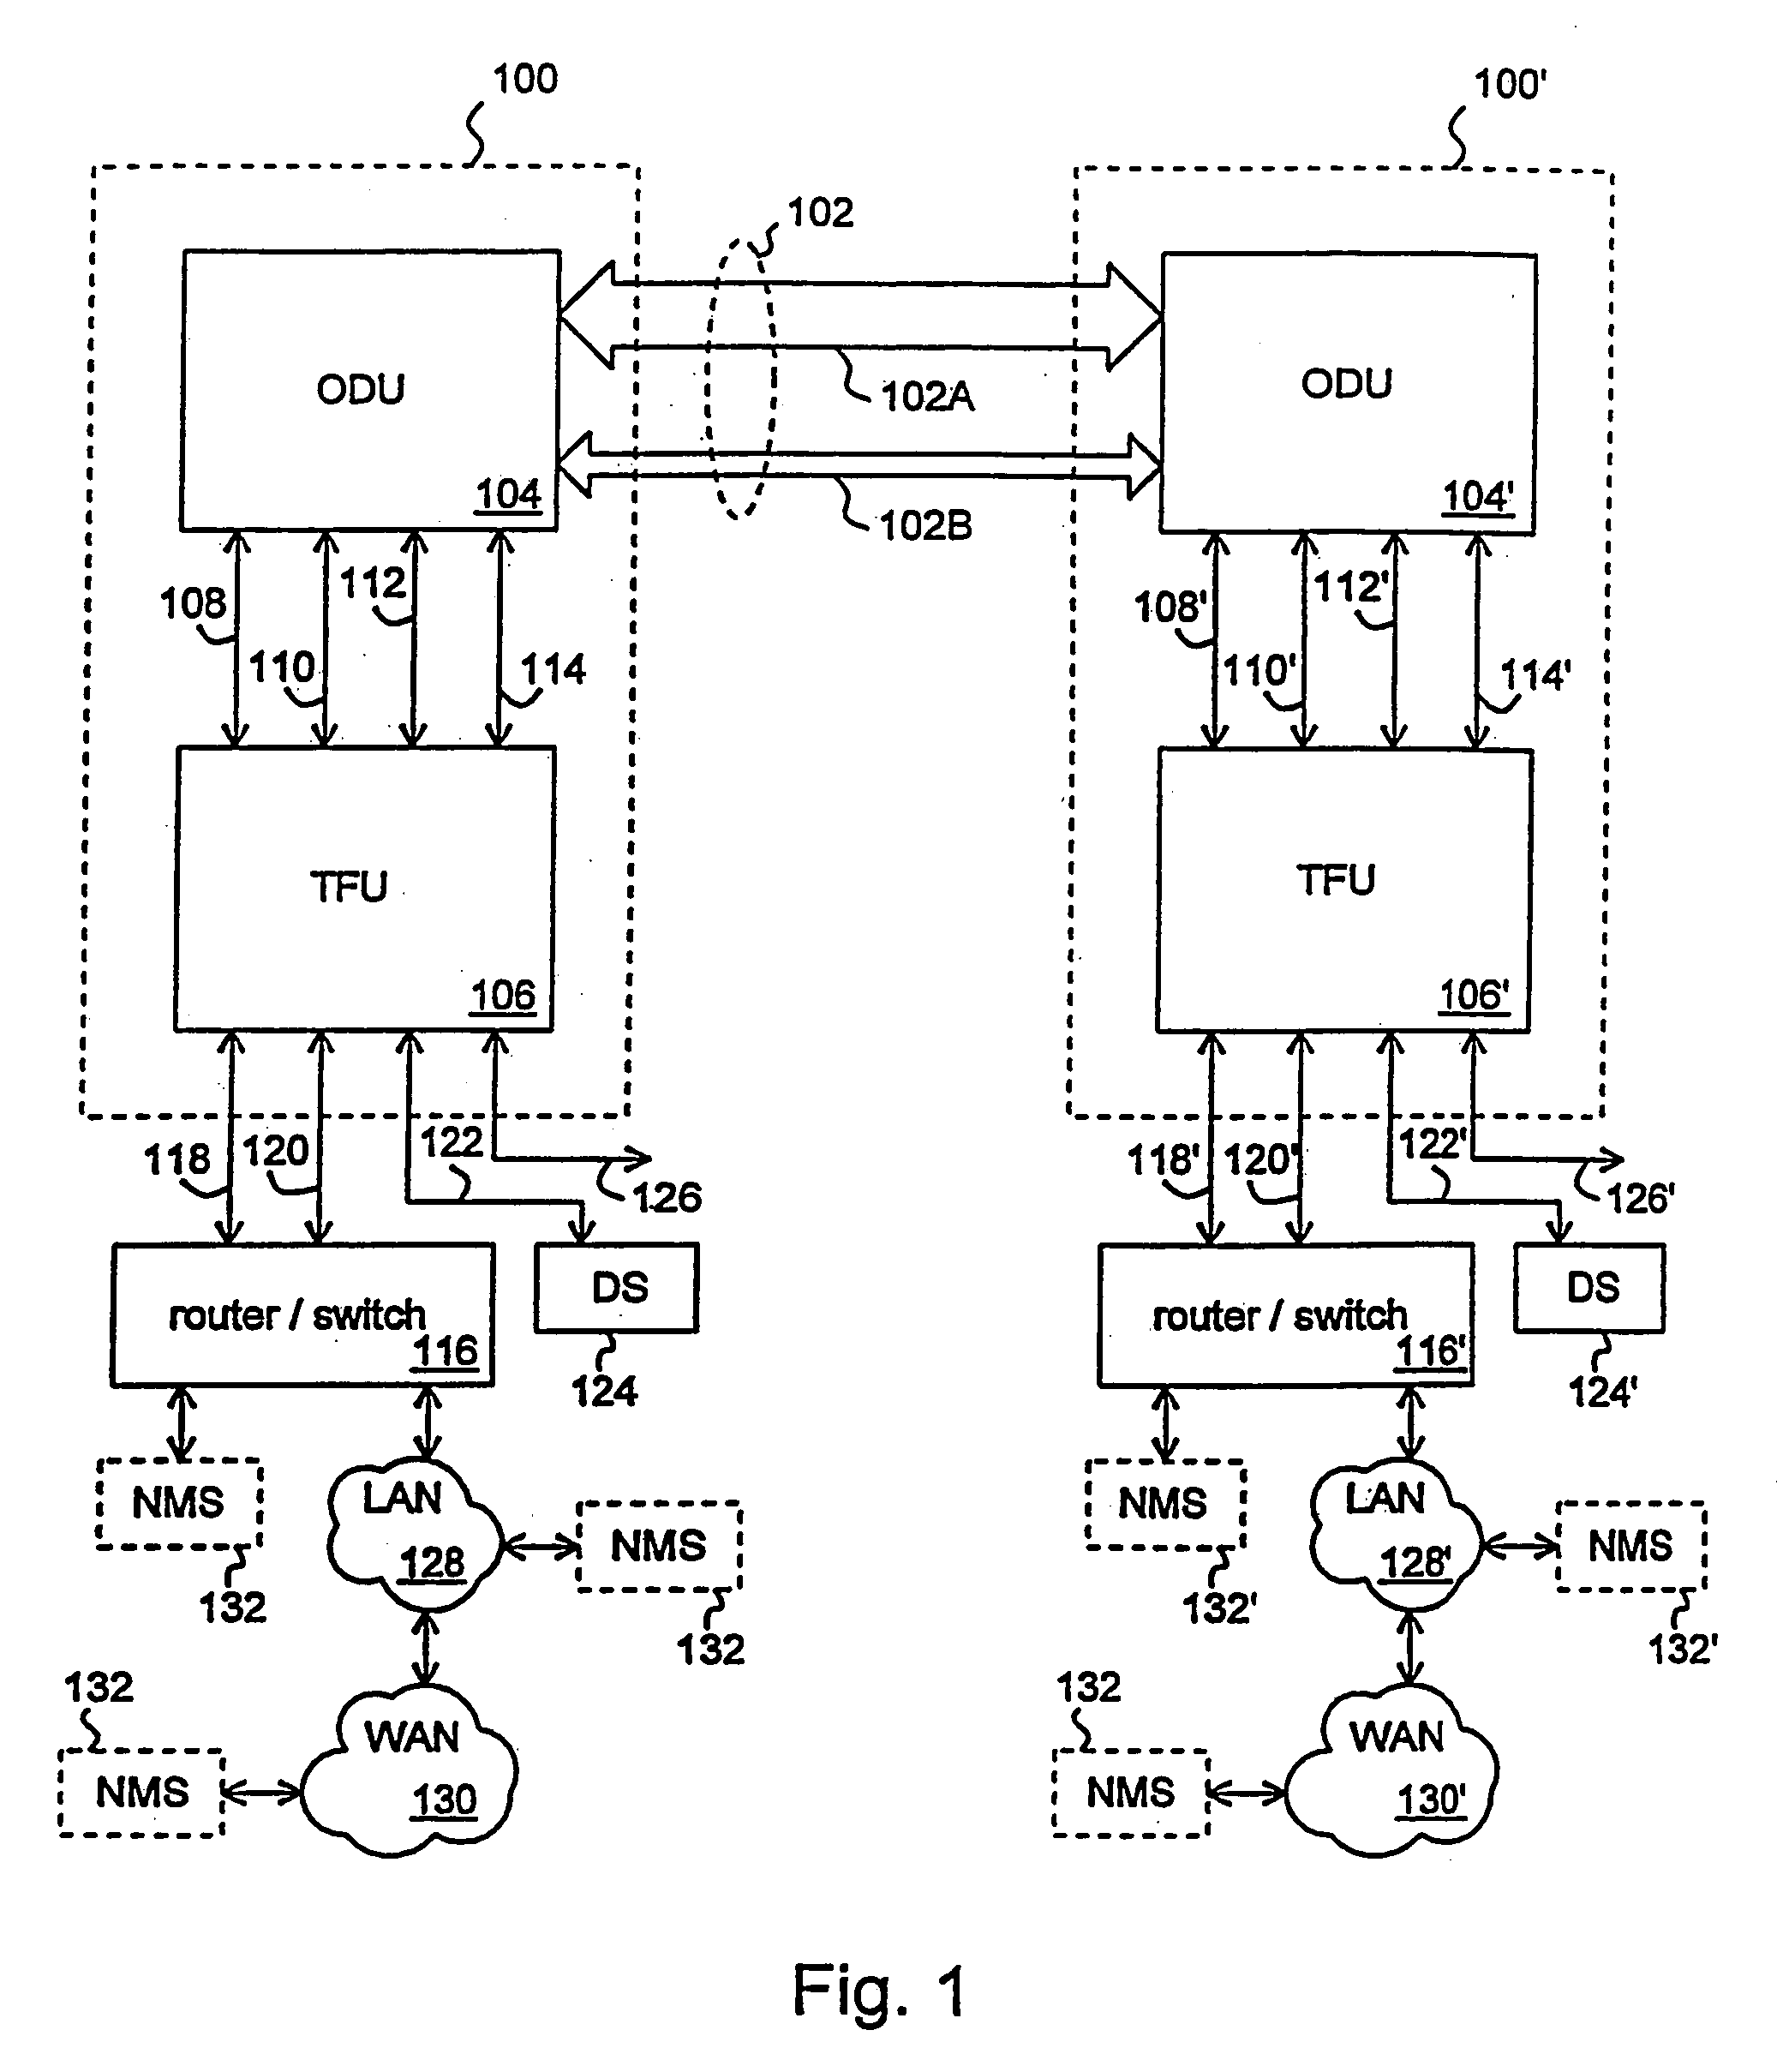 Method and apparatus for baseband transmission between a top floor unit and an outdoor unit in a terminal for a wireless metropolitan area network